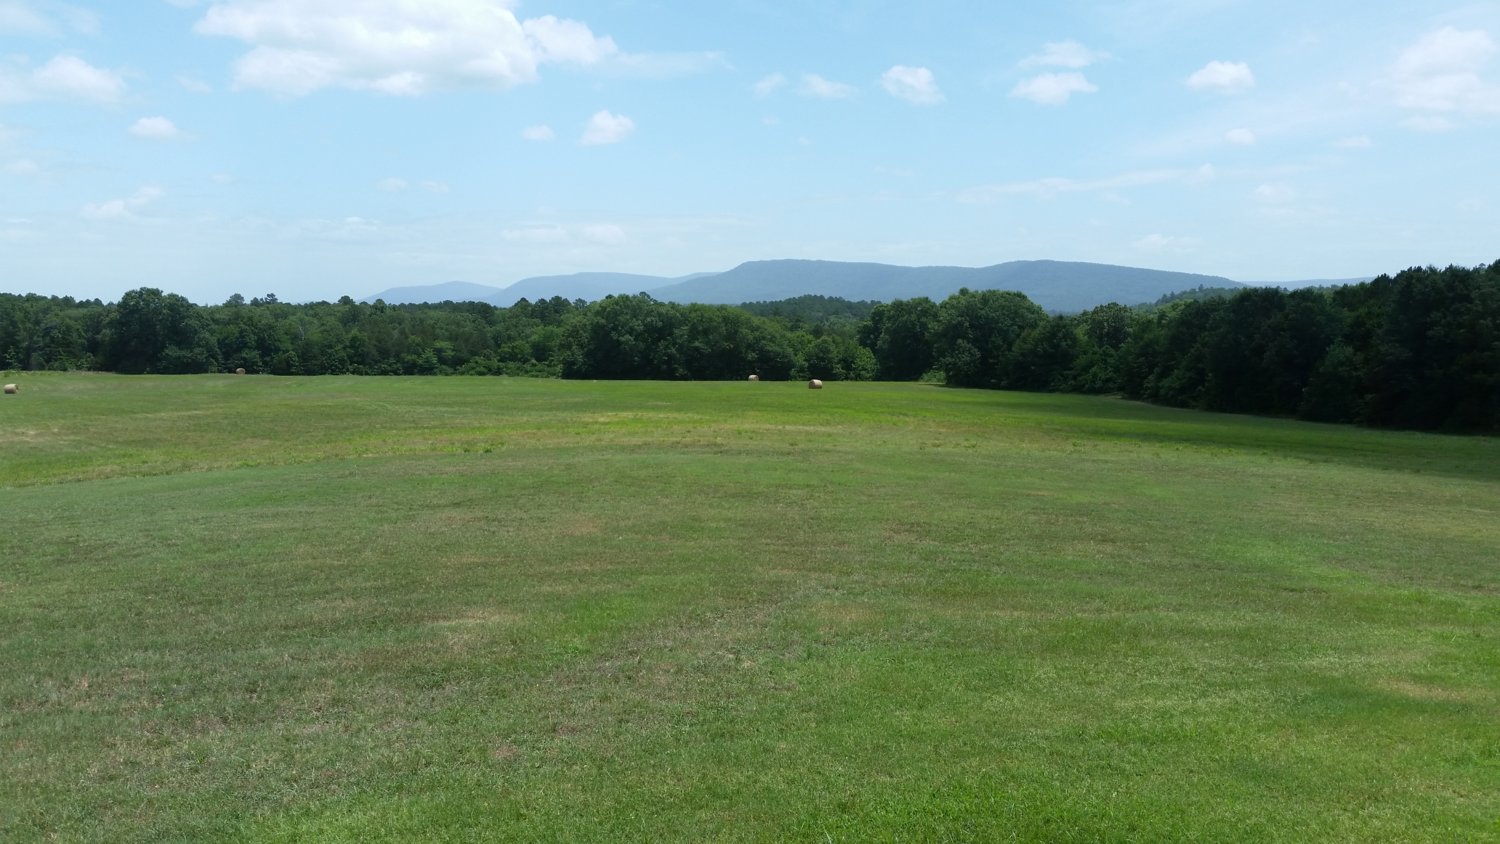 20180619_132539_southern_part_of_east_pasture.jpg